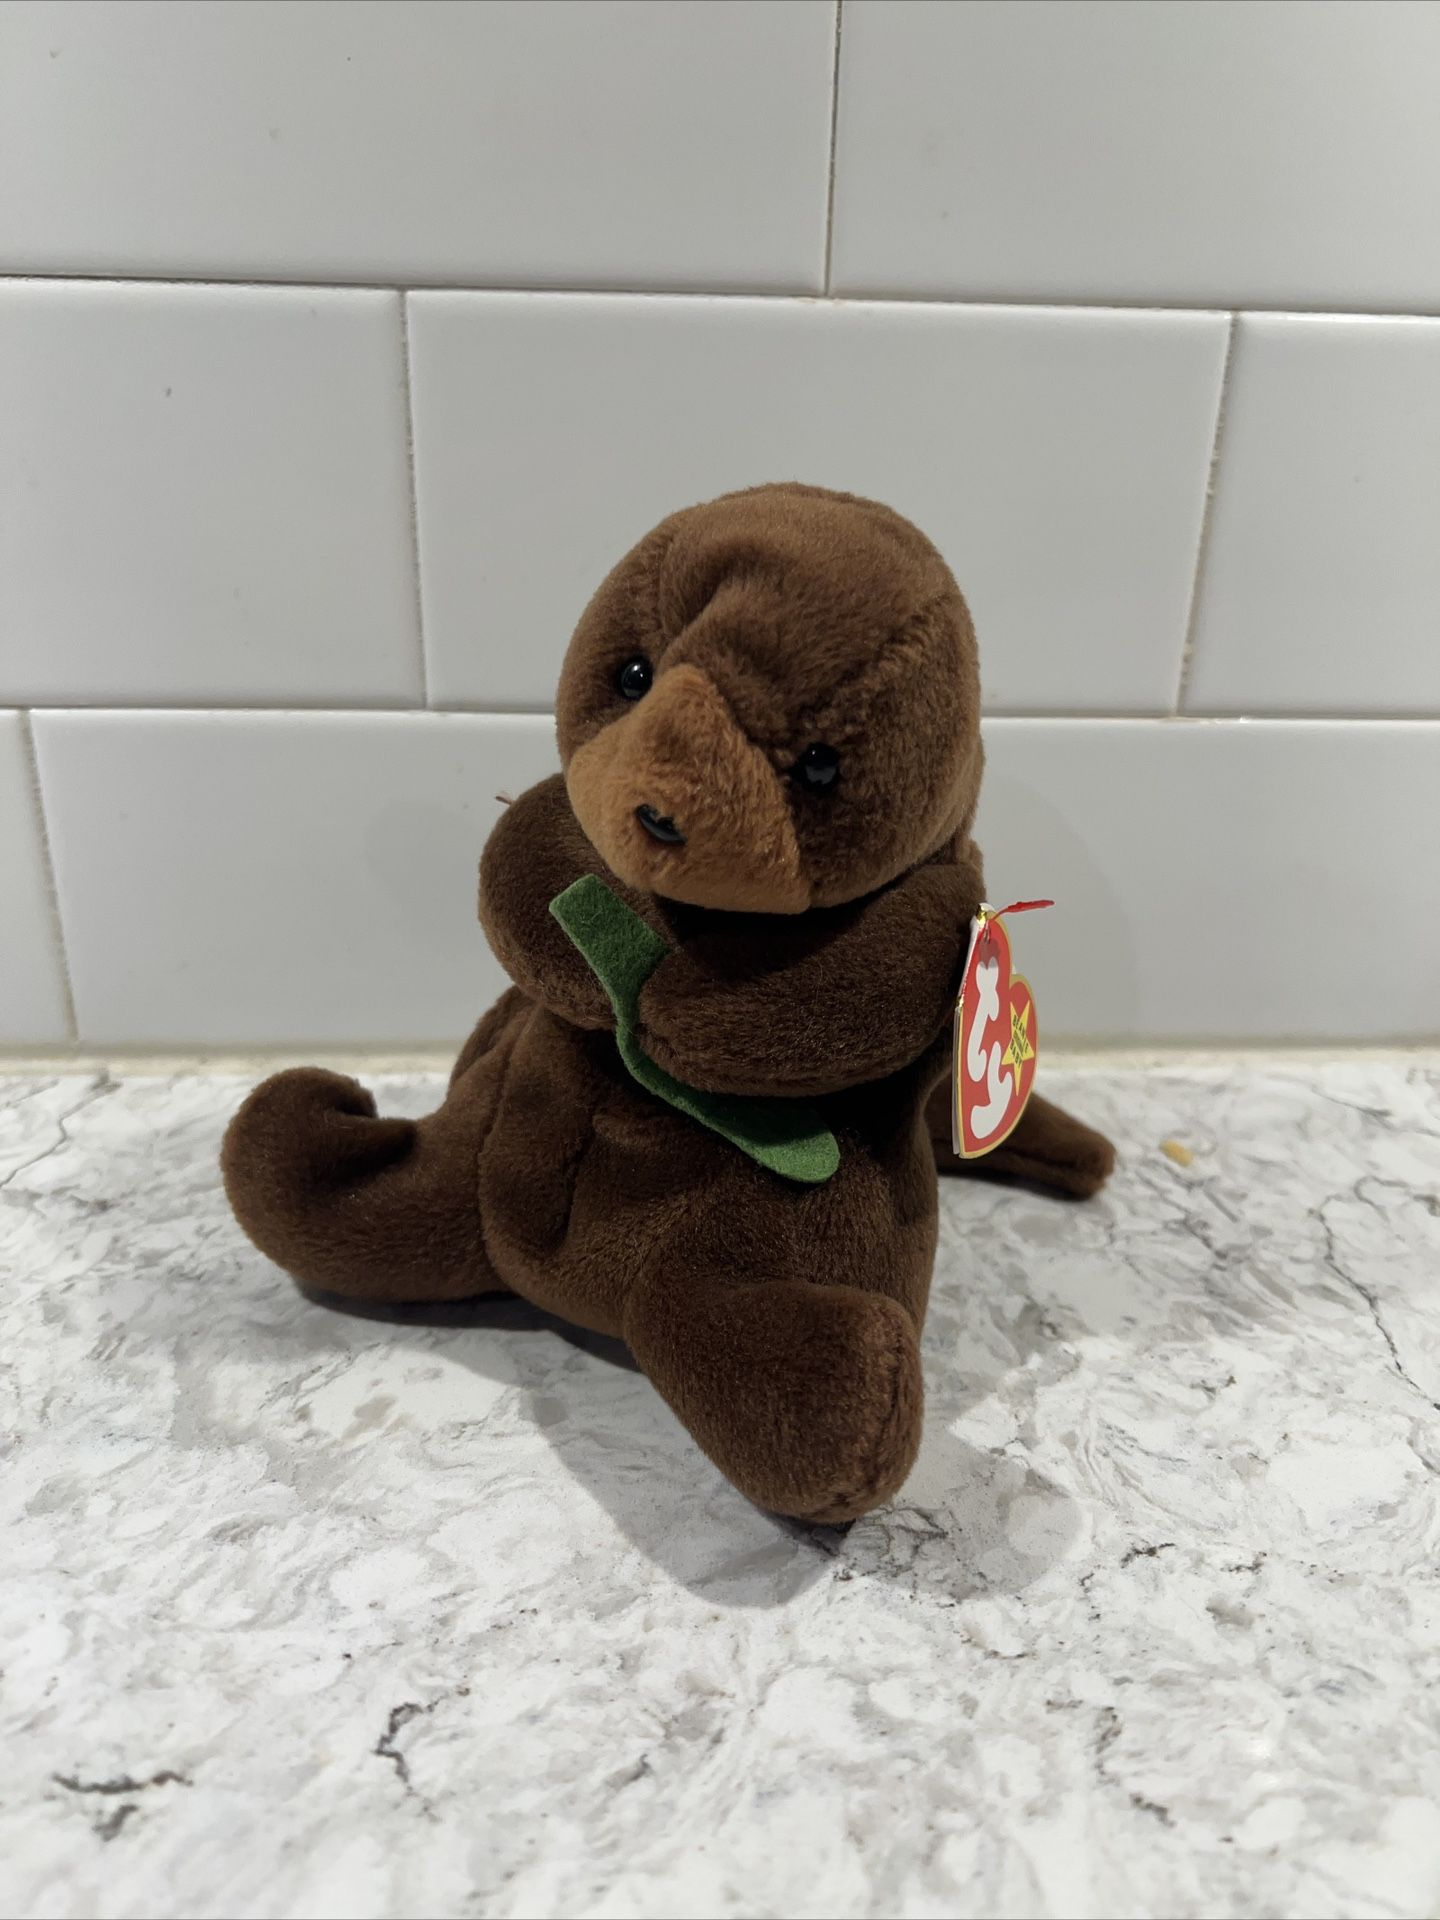 Ty Beanie Baby Babies Seaweed The Otter